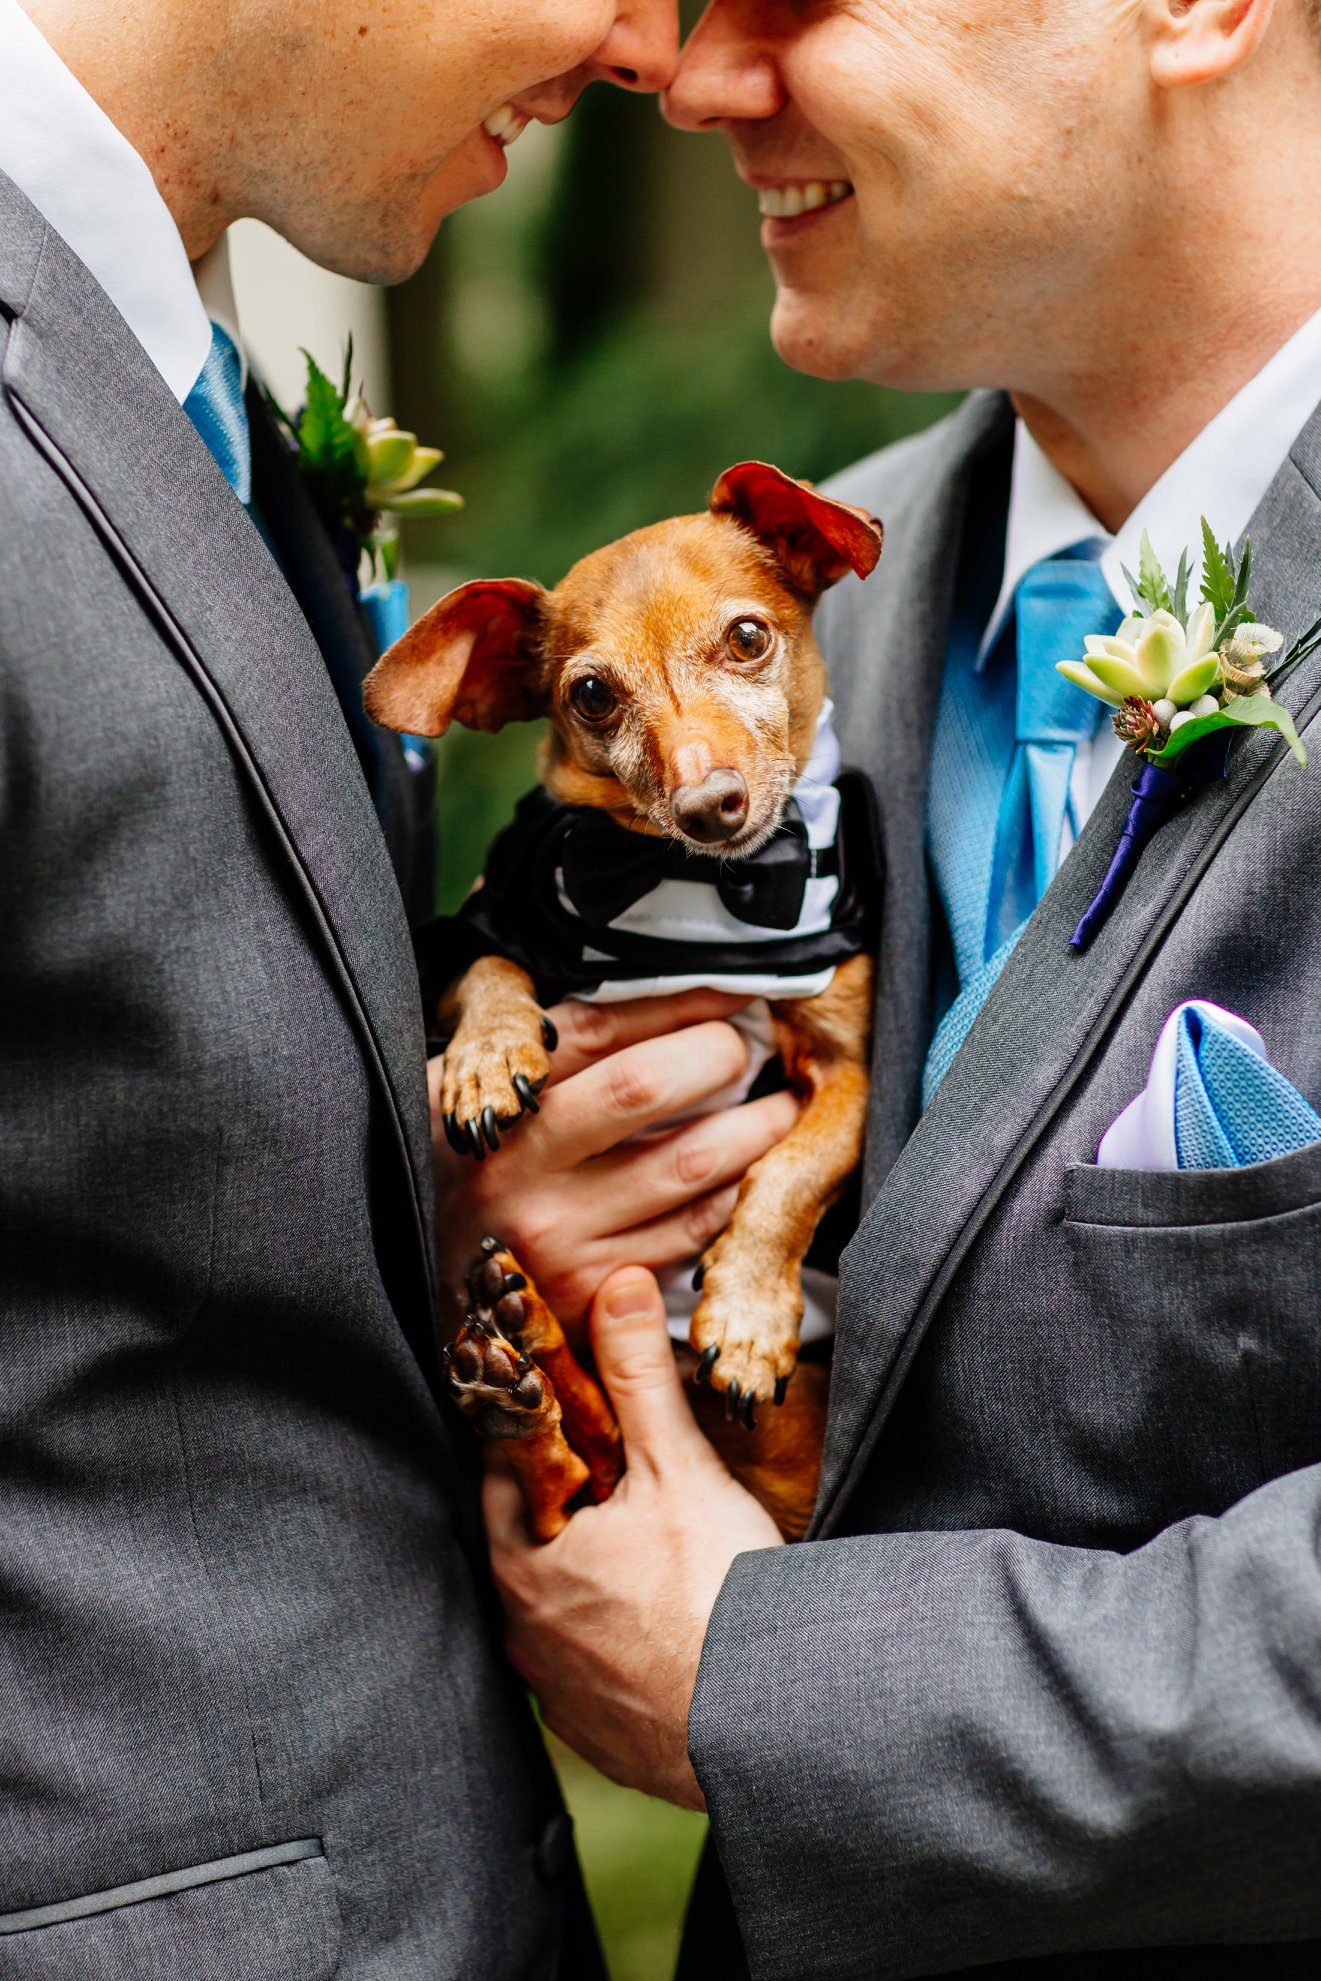 Grooms with their dog in a tux - wedding by Pink Blossom Events at The Foundry by Herban Feast